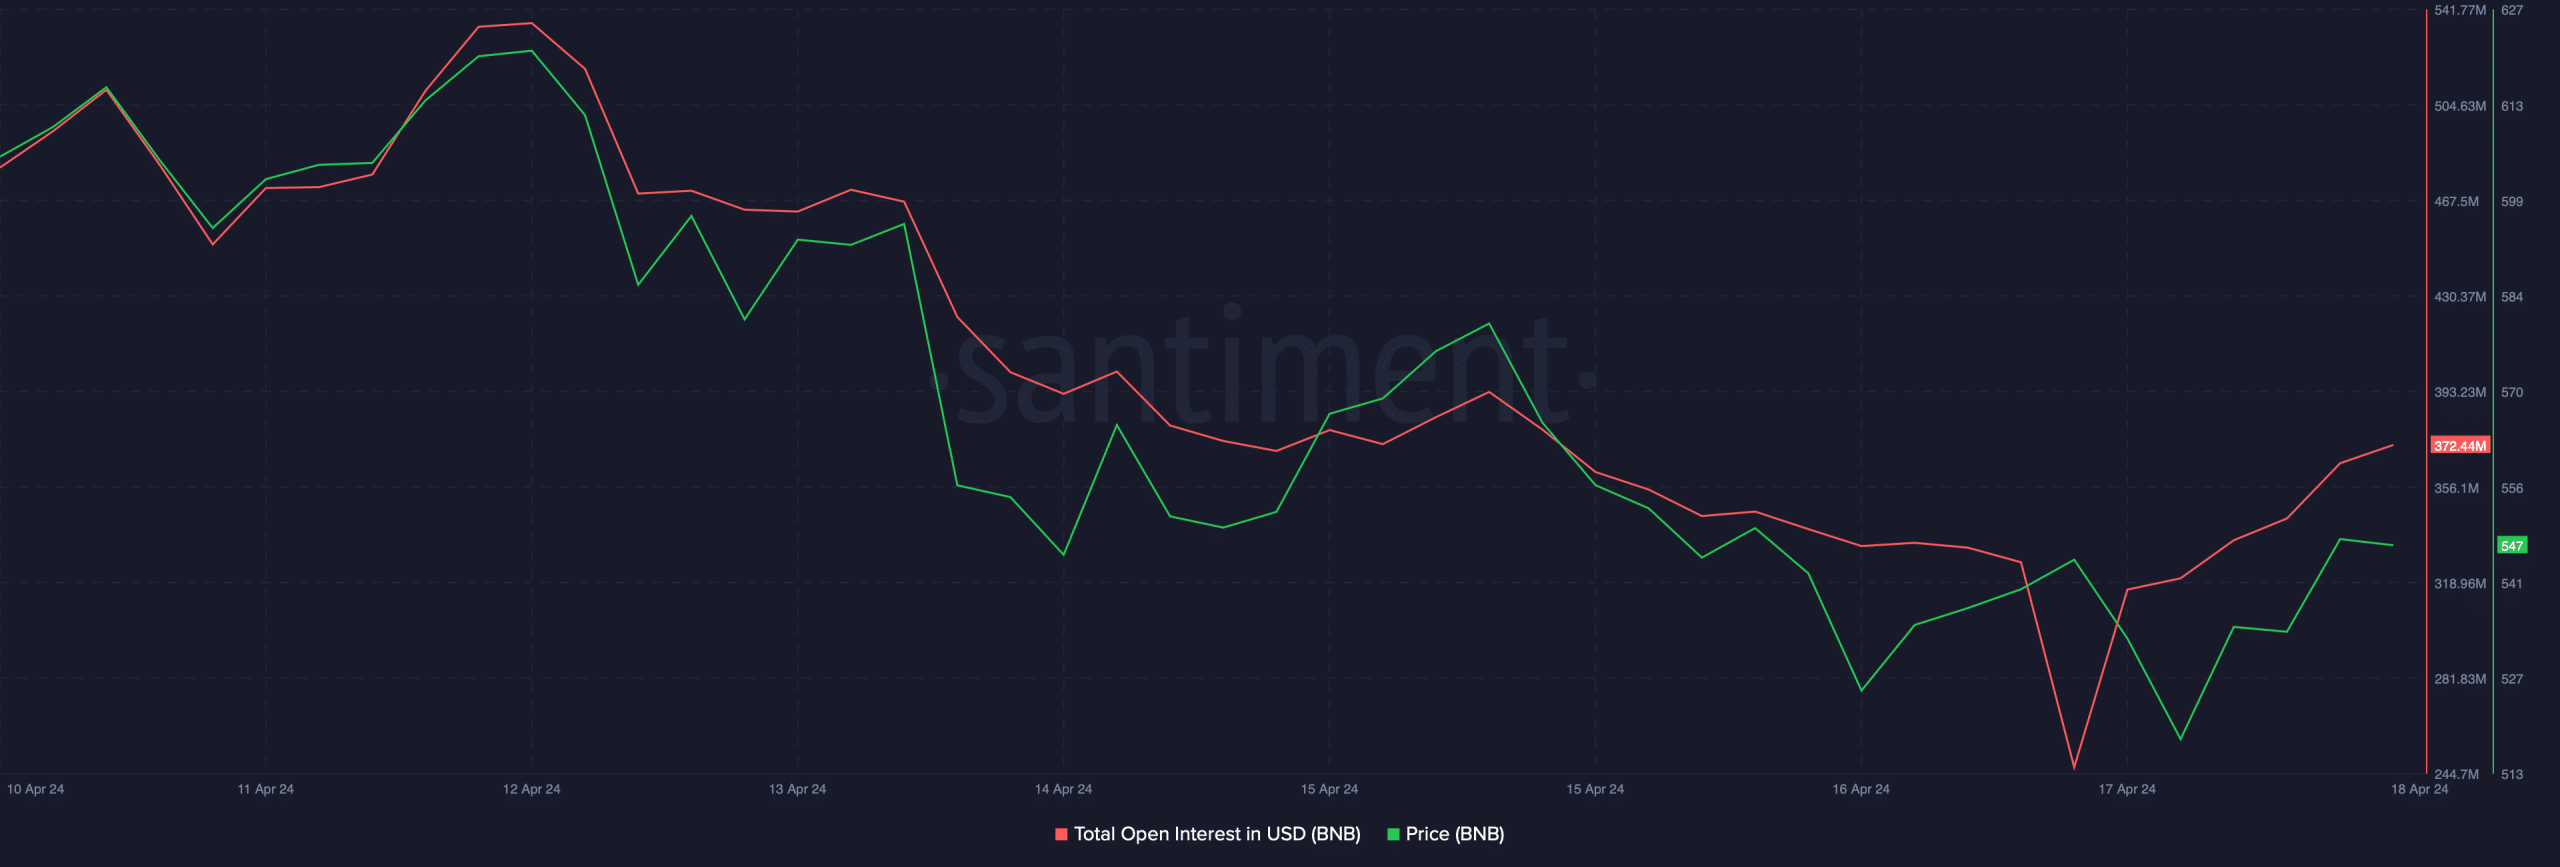 BNB's open interest increased along with its price